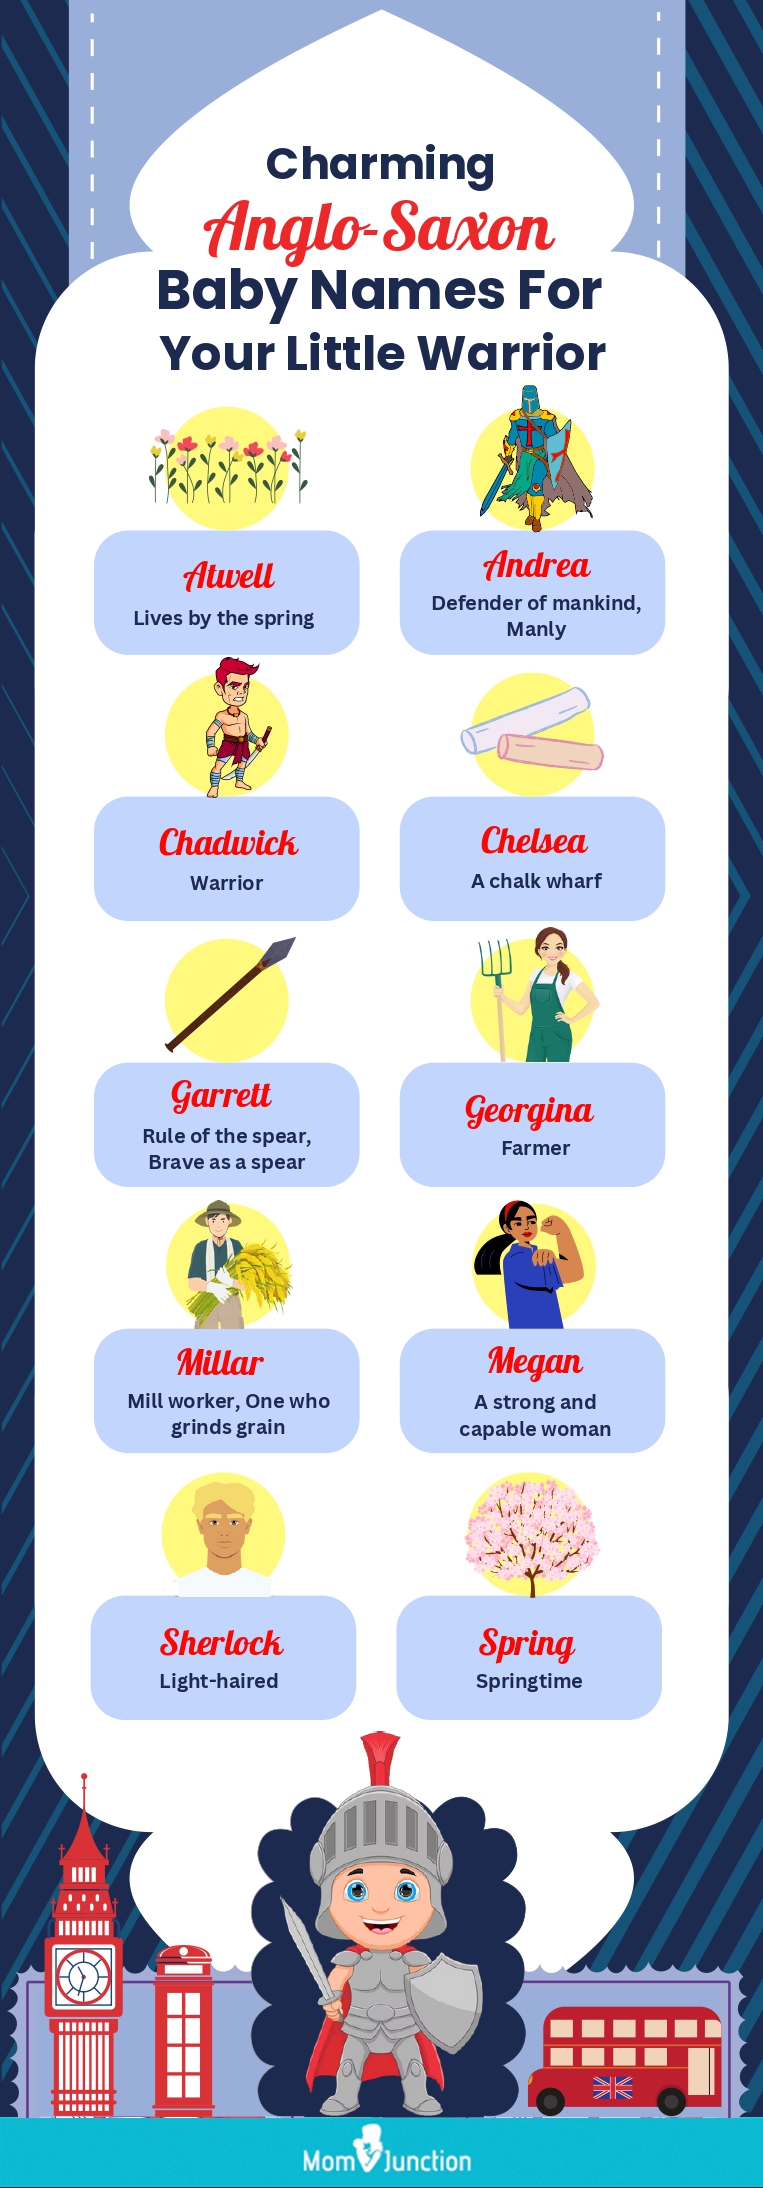 charming anglo saxon baby names for your little warrior (infographic)